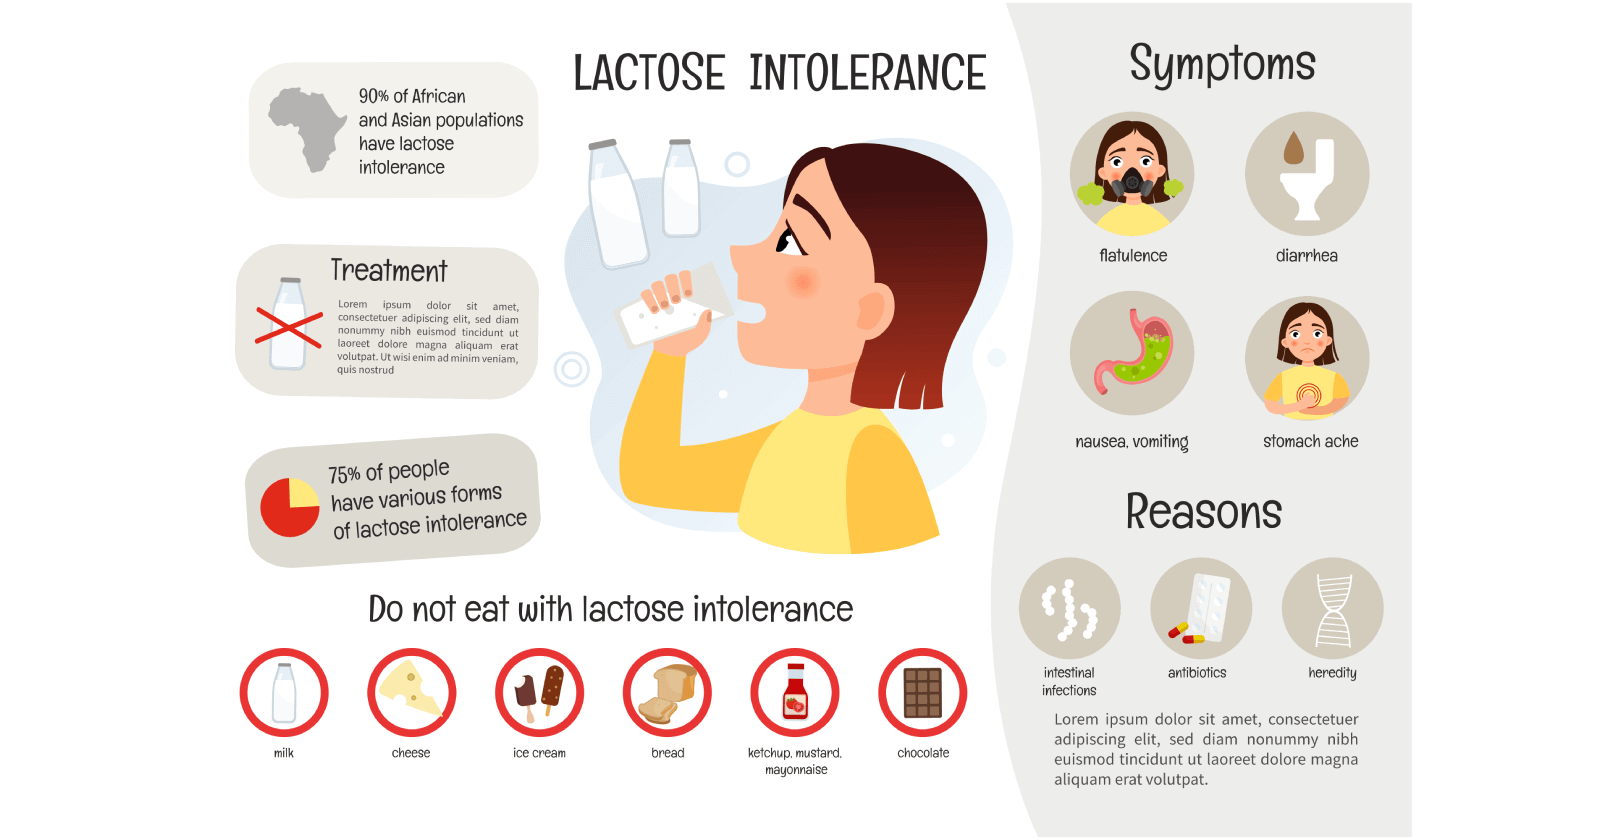 Lactose Intolerance: Symptoms, Causes And Treatments